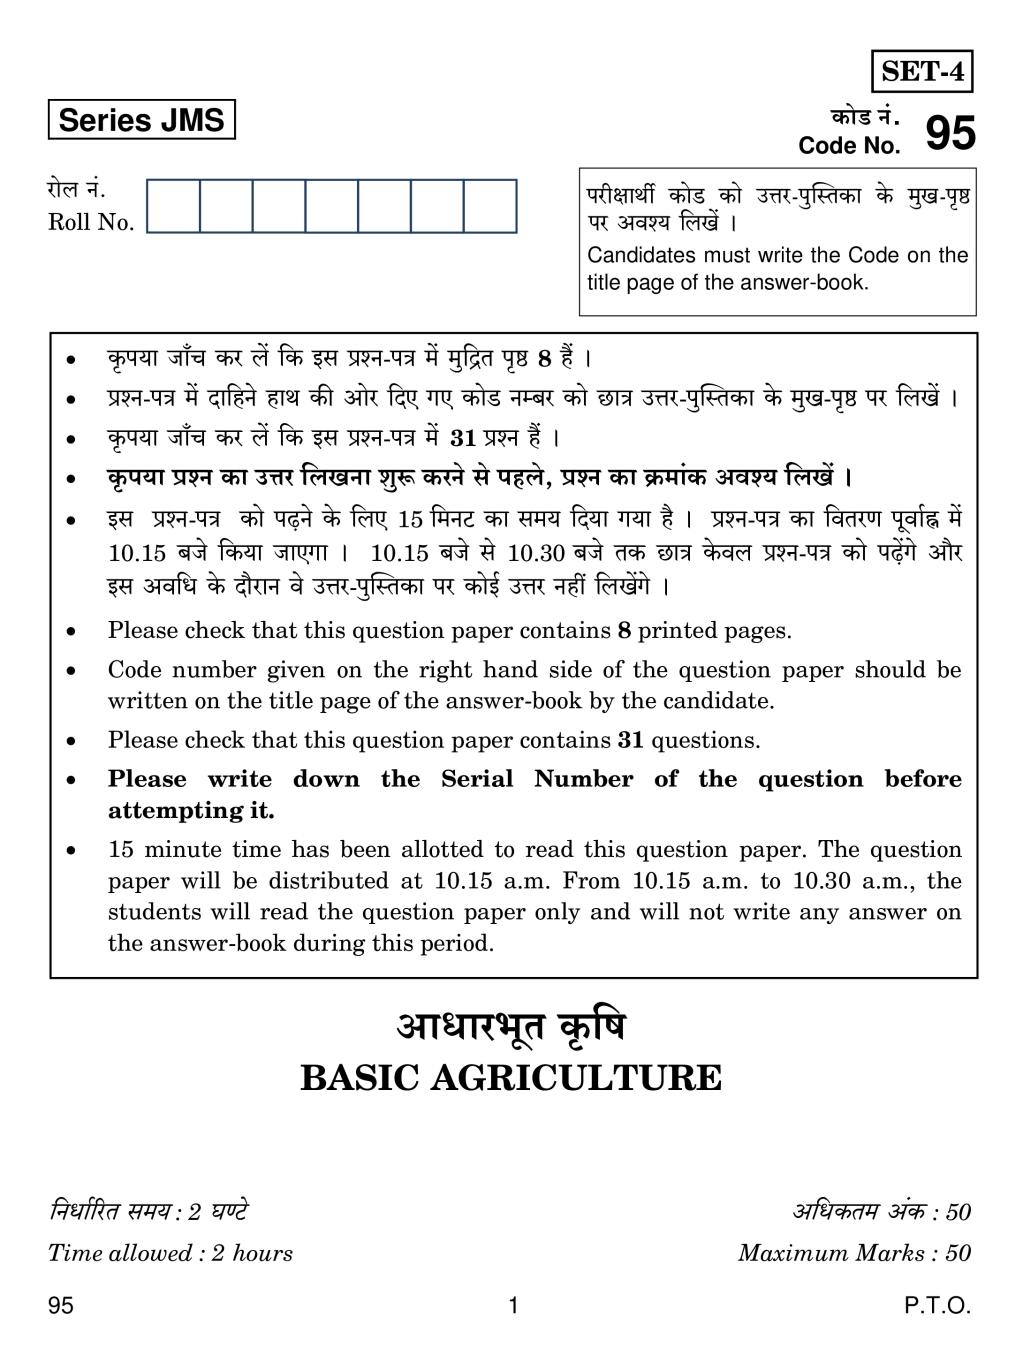 CBSE Class 10 Basic Agriculture Question Paper 2019 - Page 1